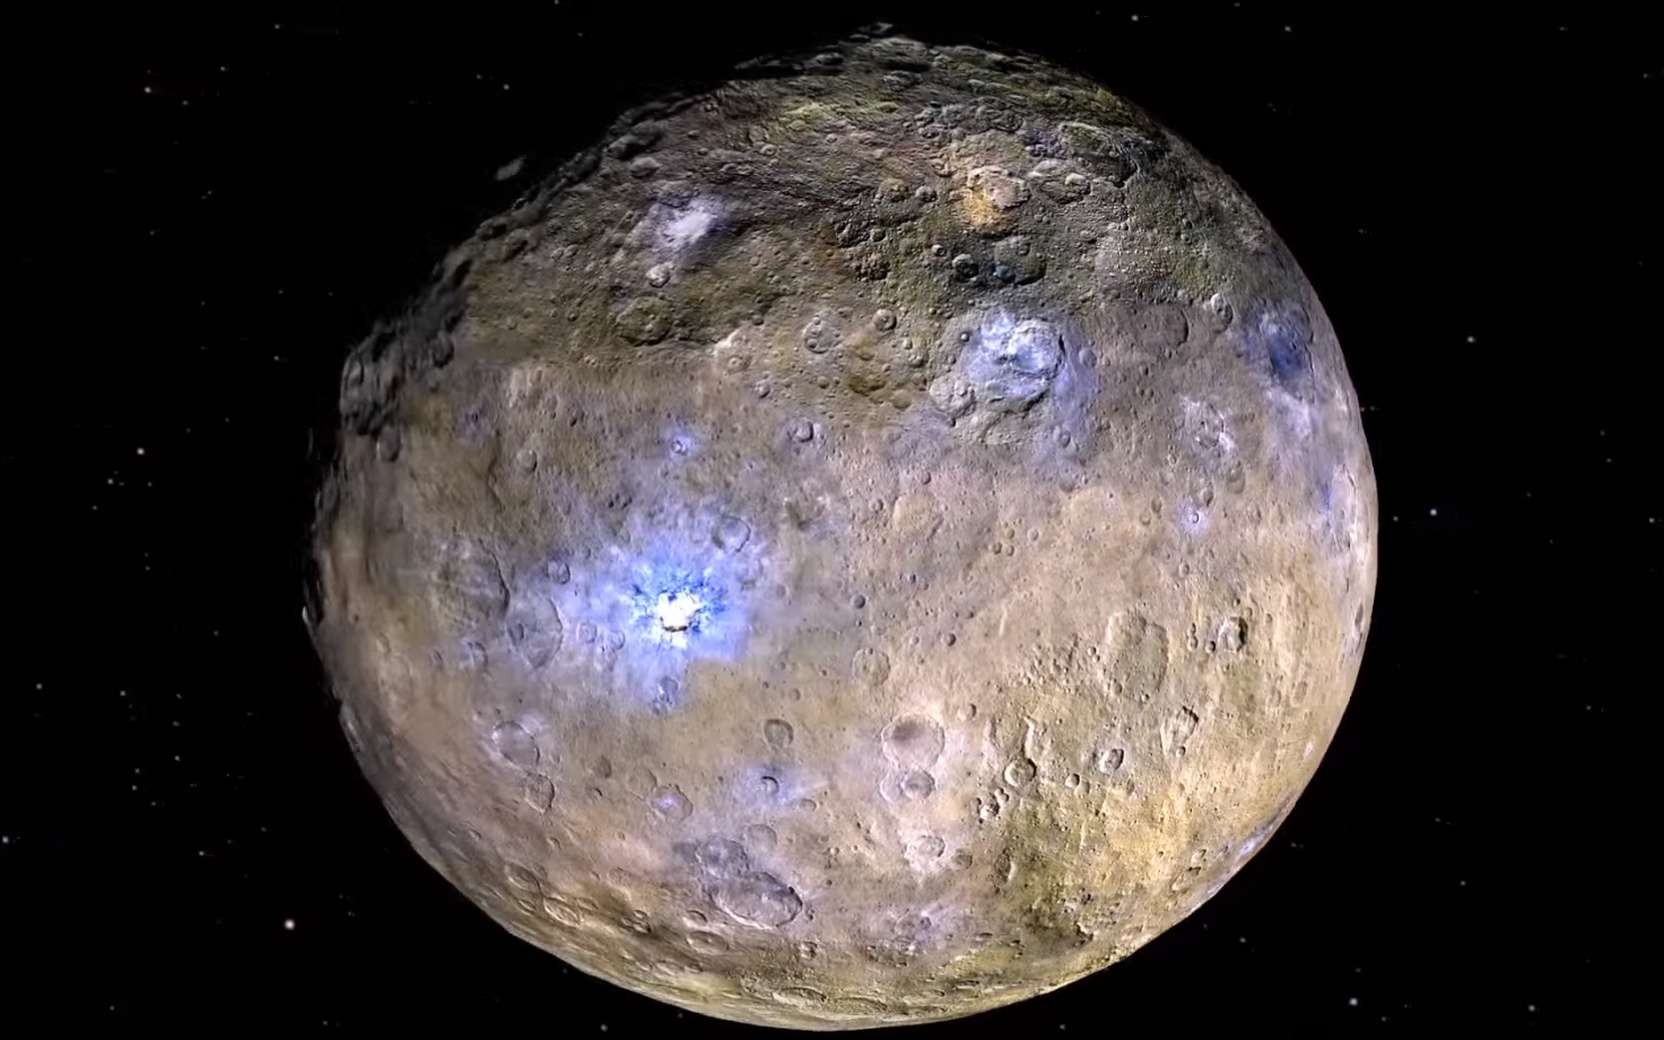 What if we went to live around Ceres, in the asteroid belt? 